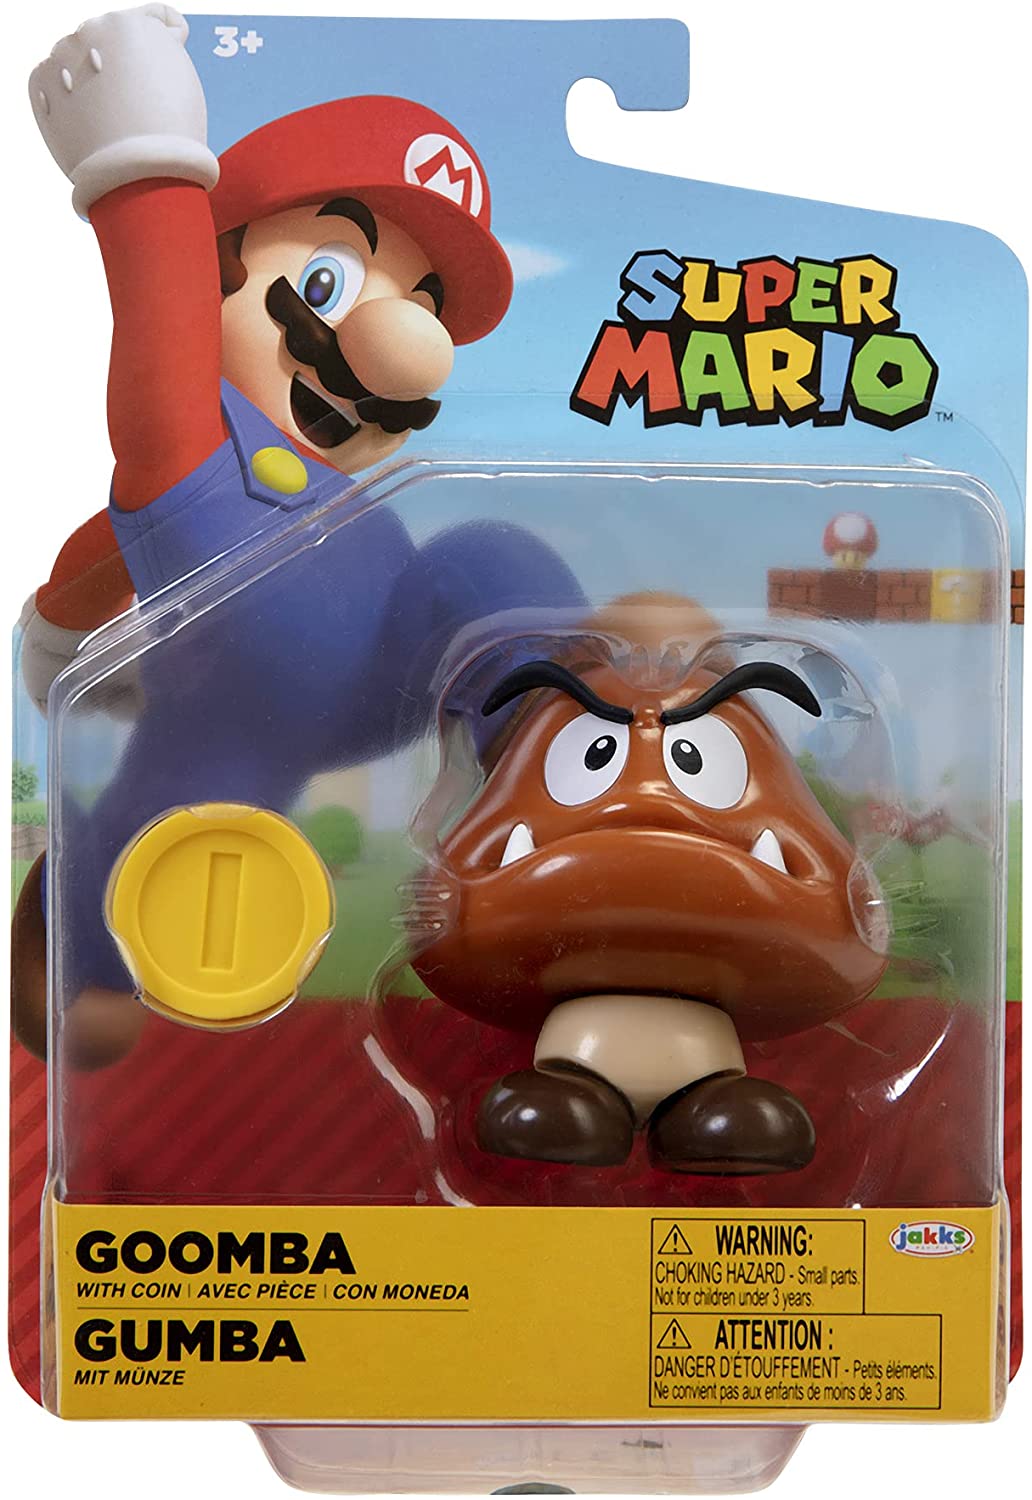 Jakks Pacific World of Nintendo Super Mario Goomba 4-inch Collectible Toy with Coin Accessory